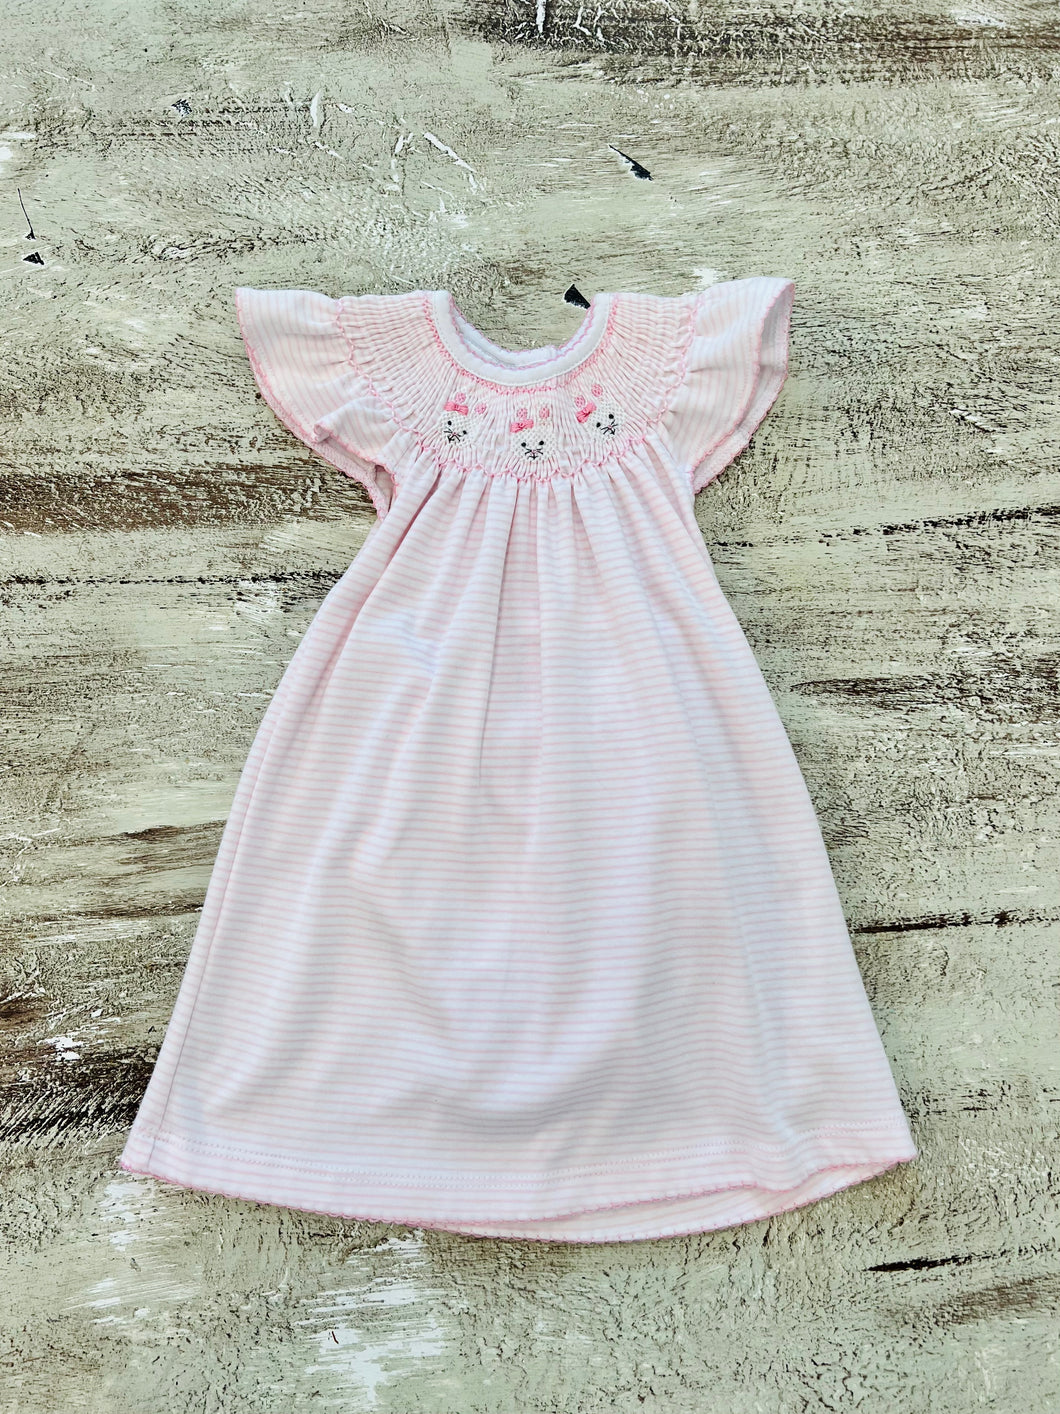 Magnolia Baby Classic Bunnies Gown